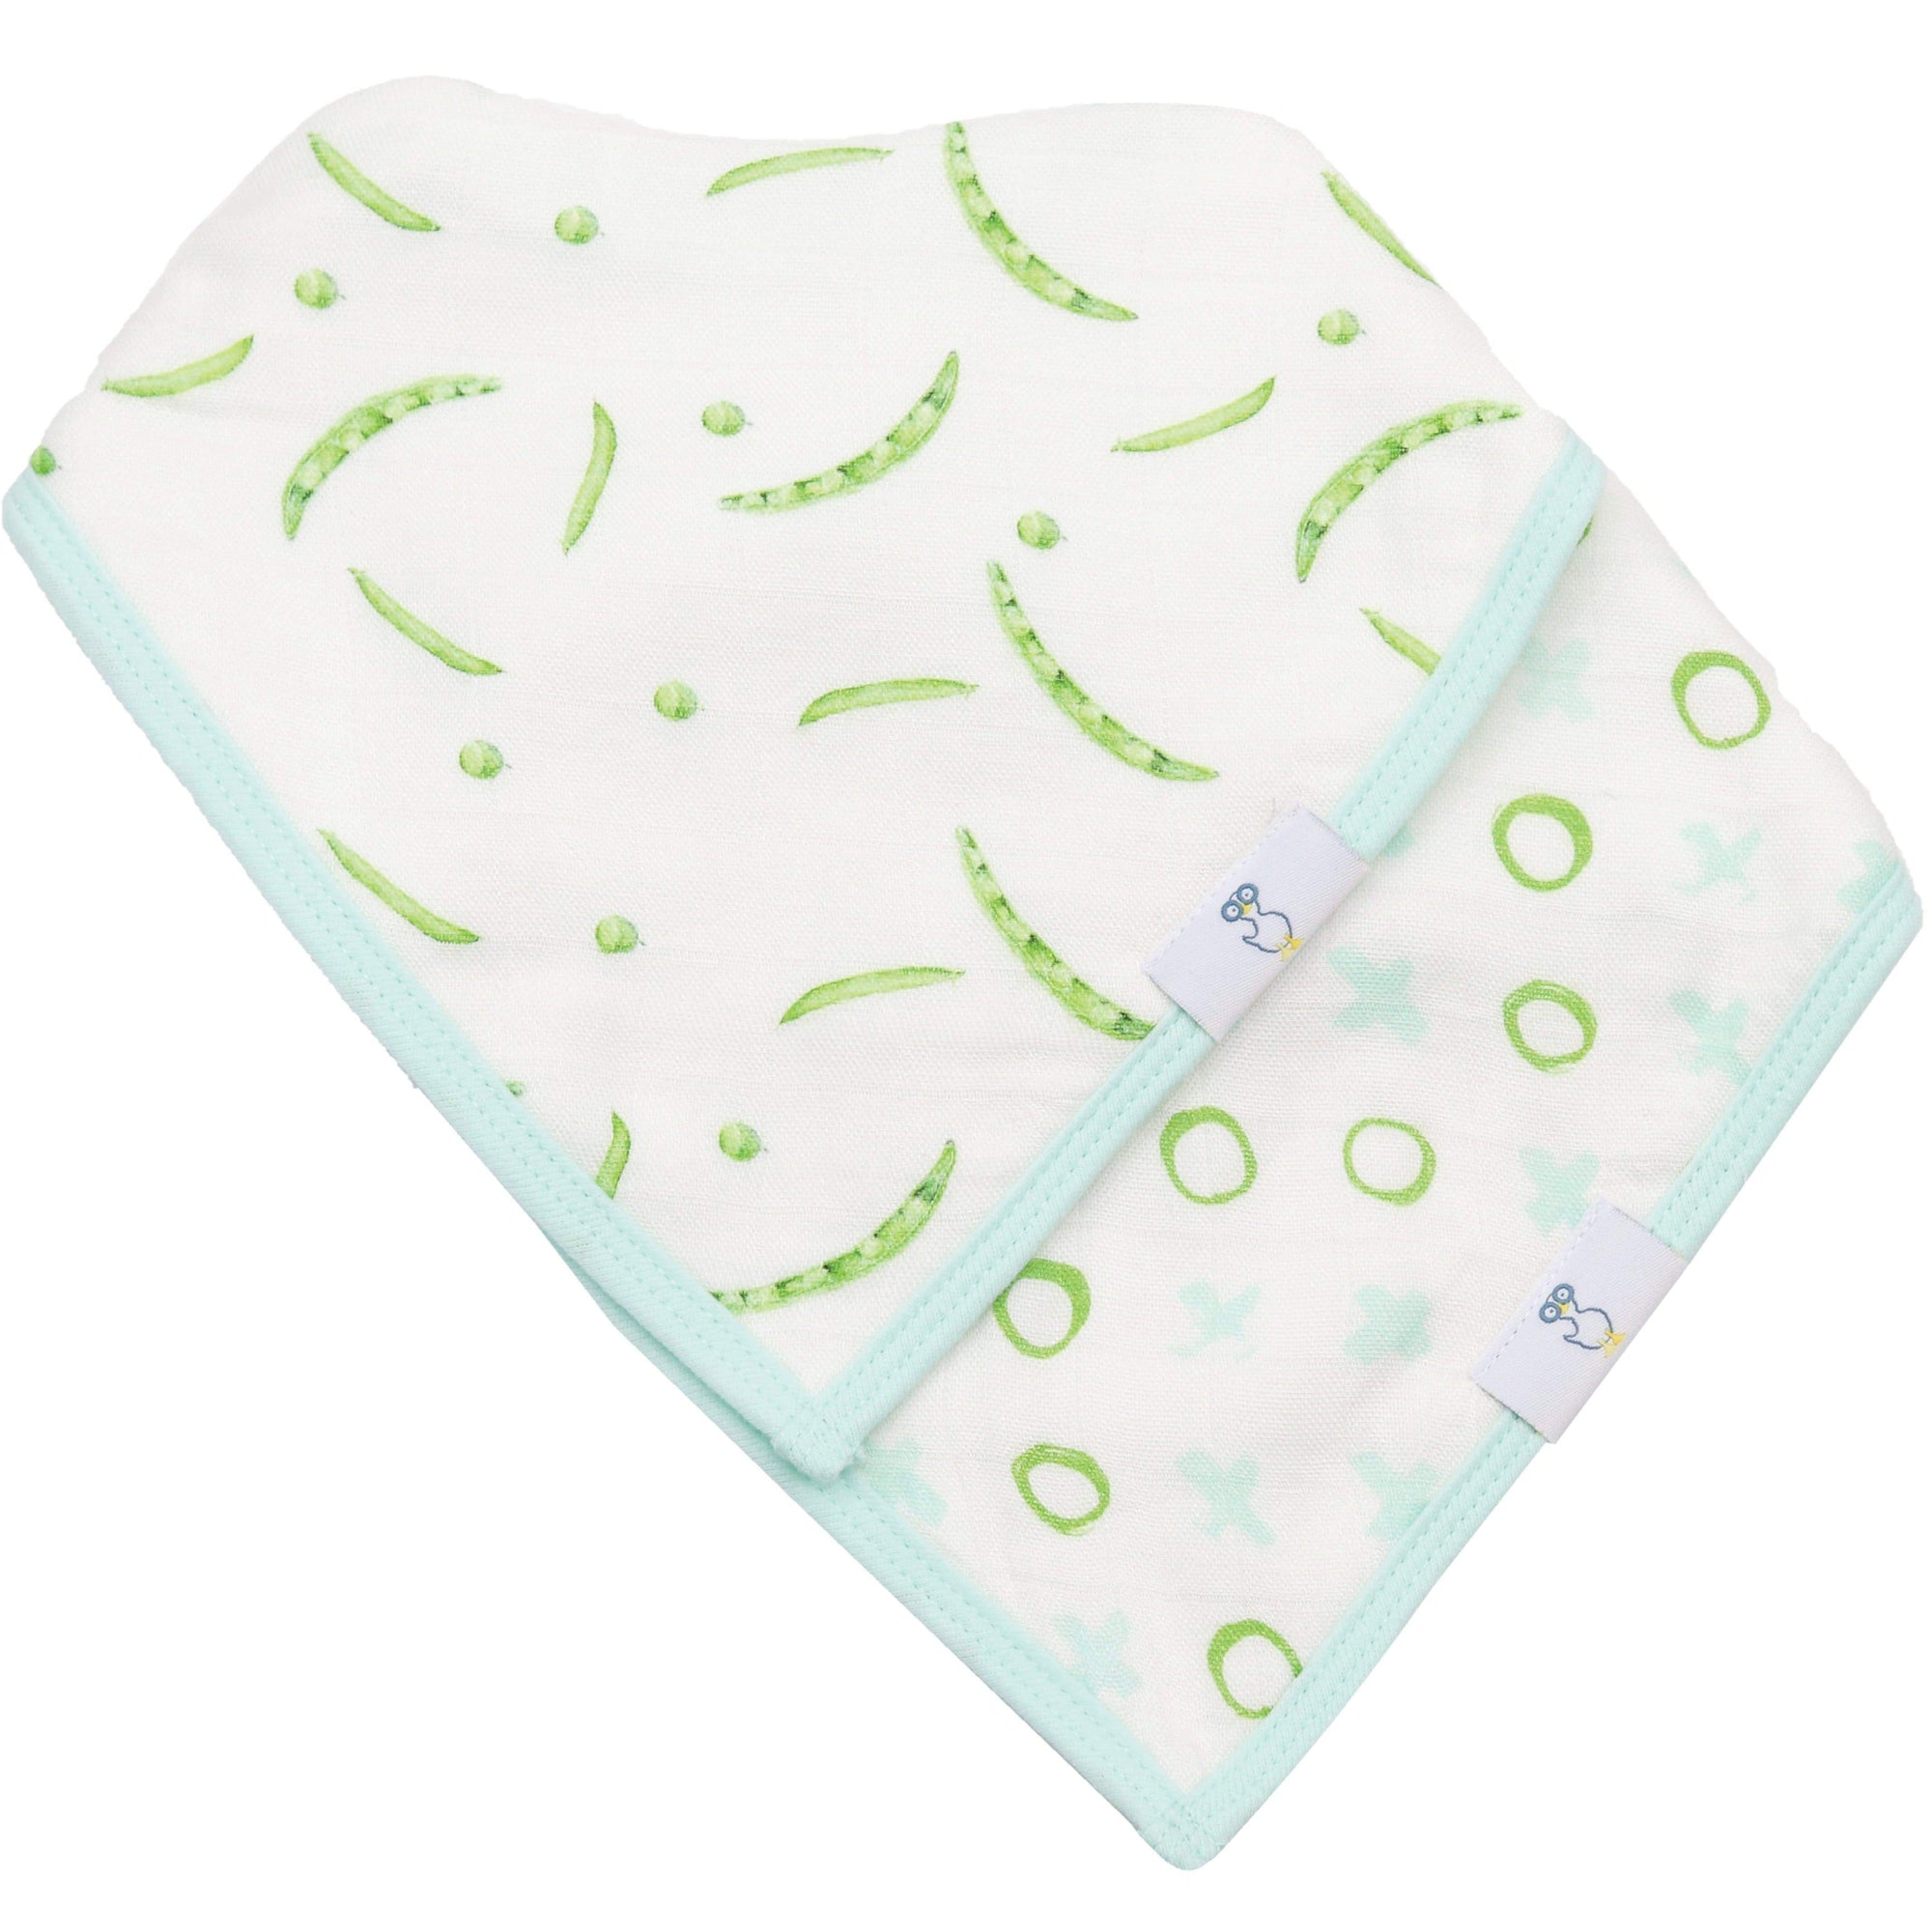 Goosewaddle 2 Pack Muslin & Terry Cloth Bib Set, Peas and OX